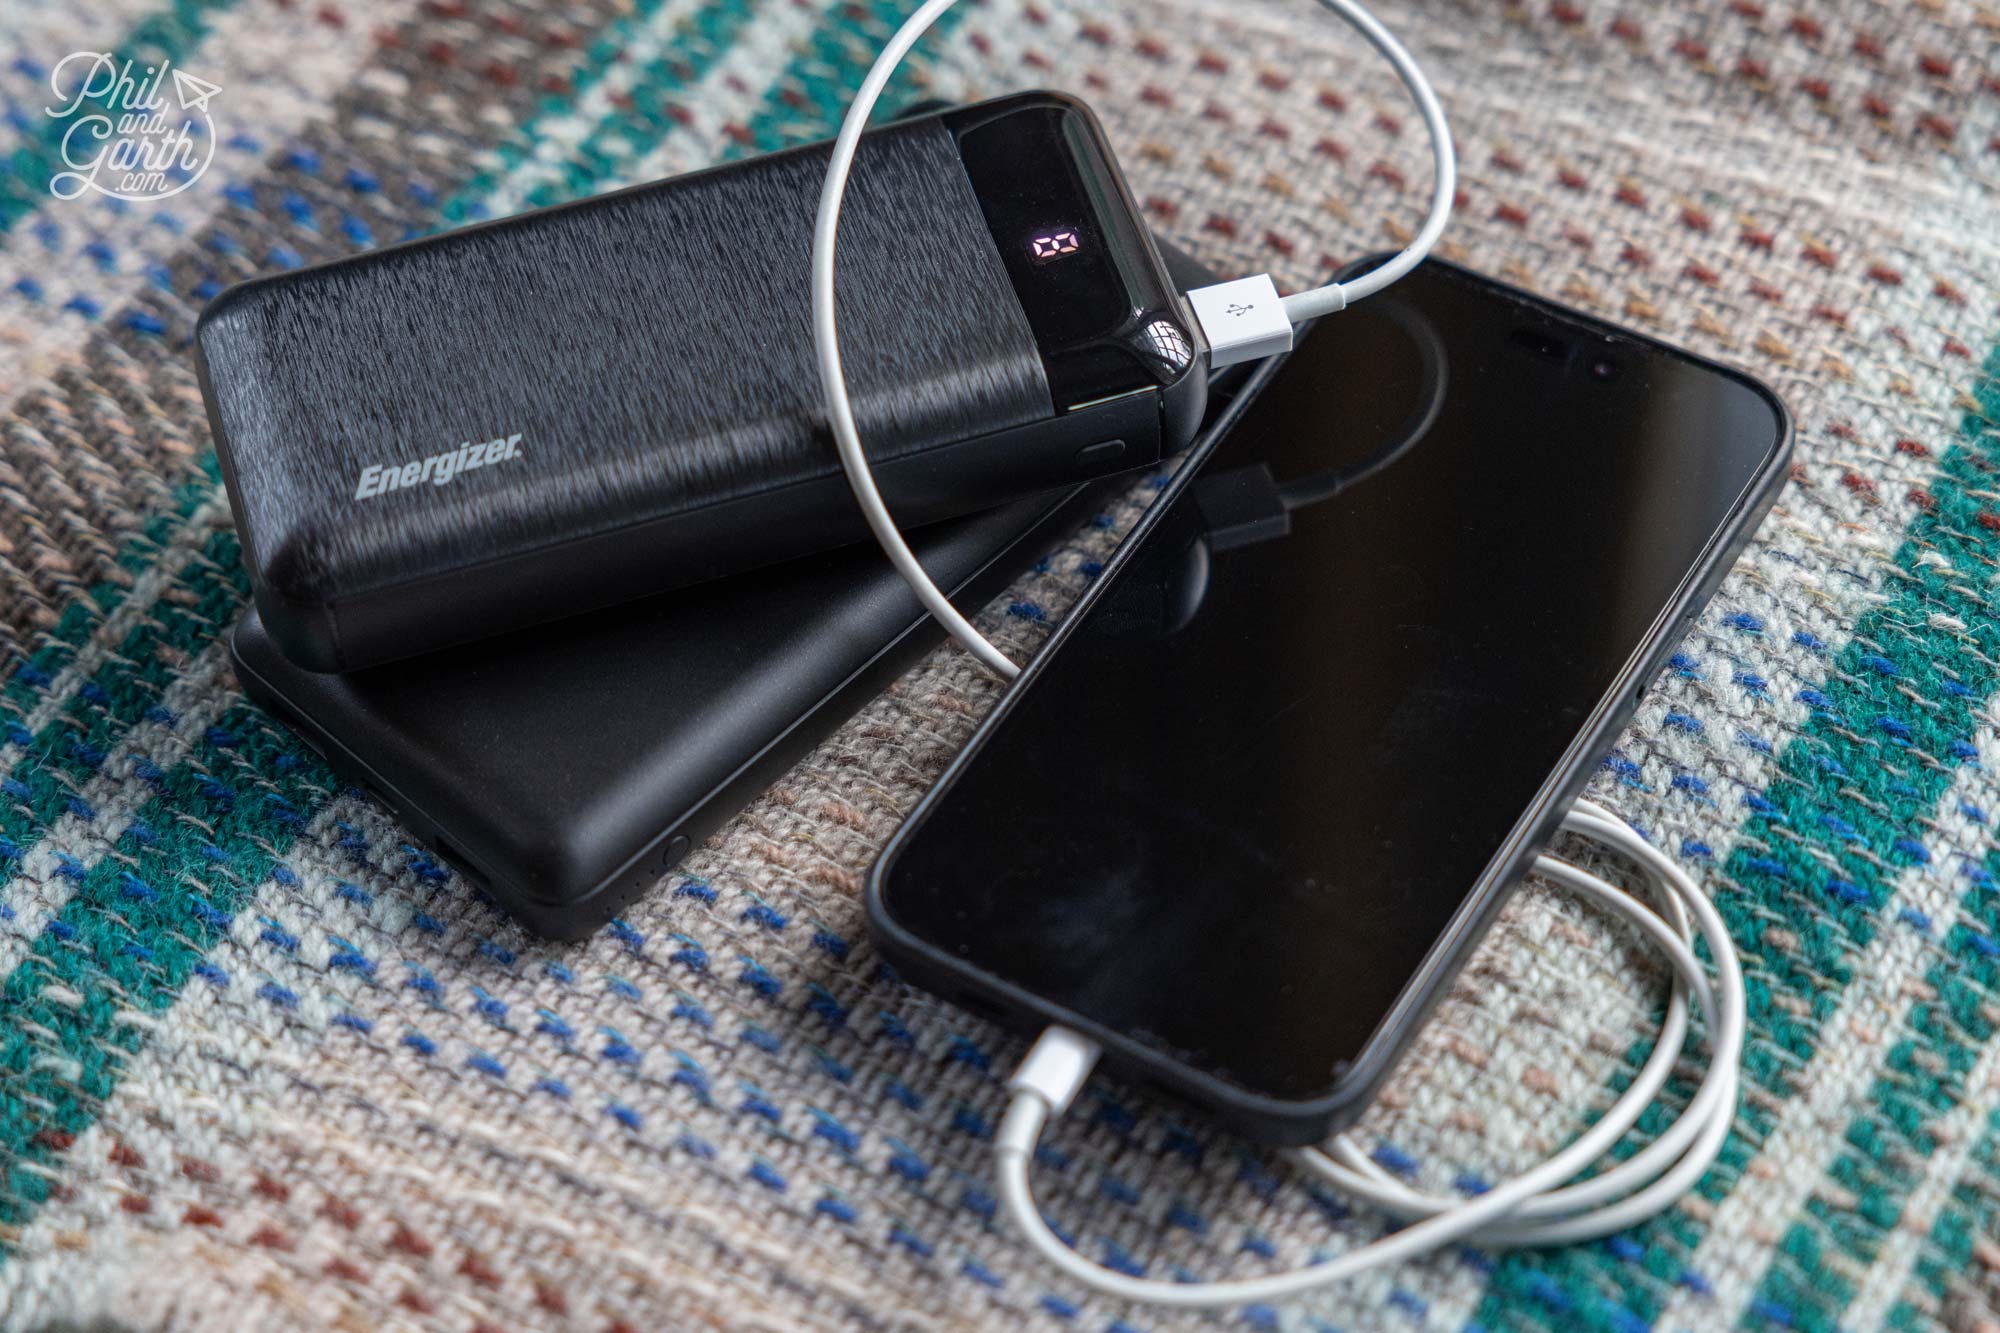 Number 1 on your Glasto festival packing list is a power bank charger